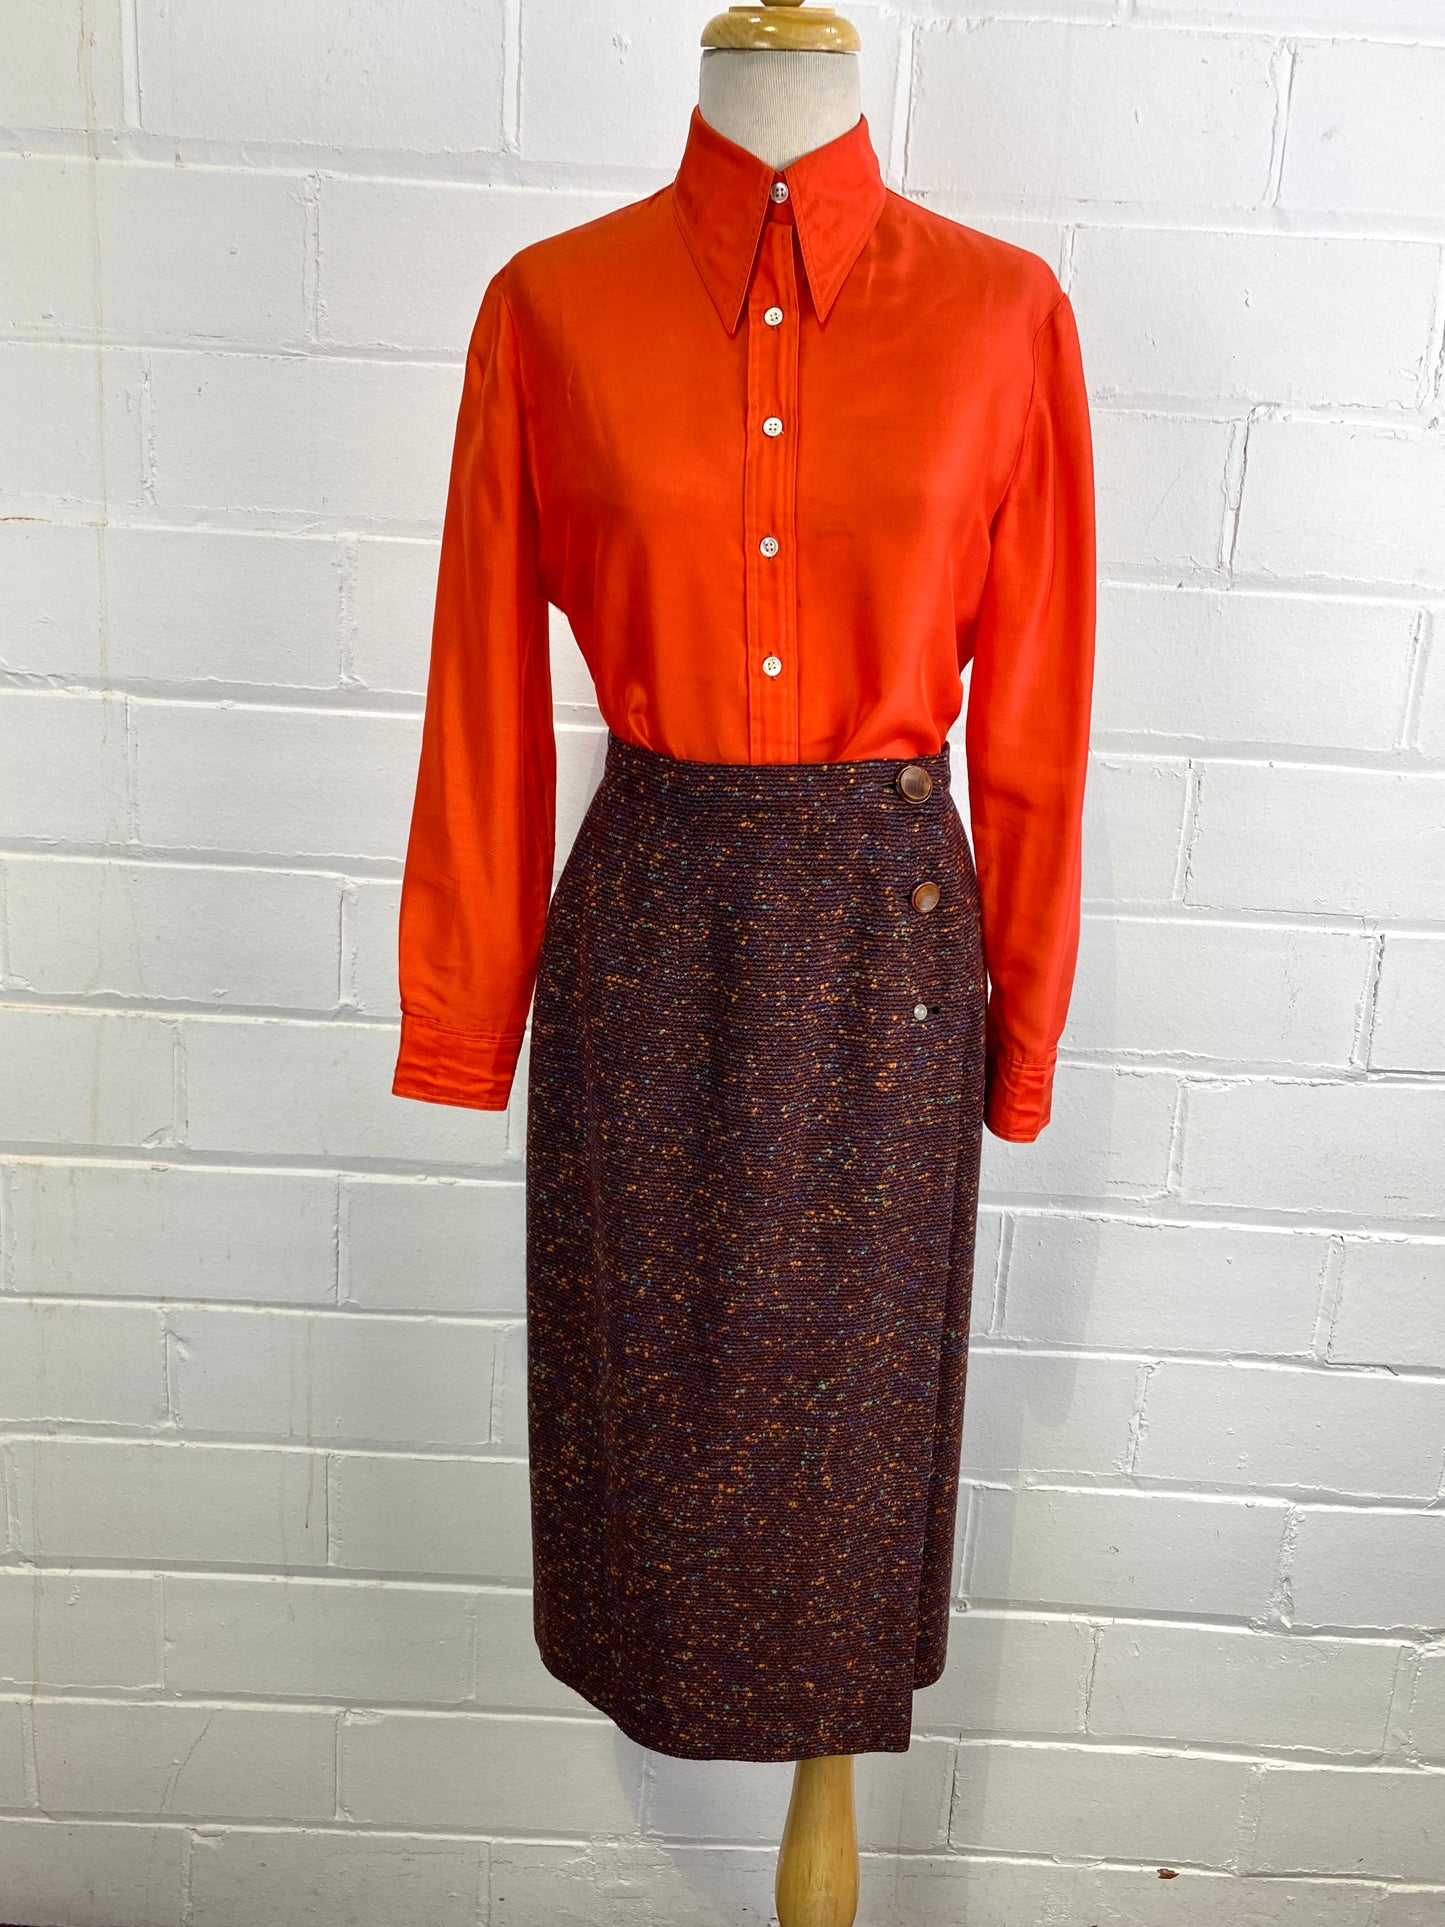 1950s Wool Skirt, Brown Bouclé with Blue and Orange Flecks, Side Buttons, Mid Century Vintage Pencil Skirt, 25 Waist